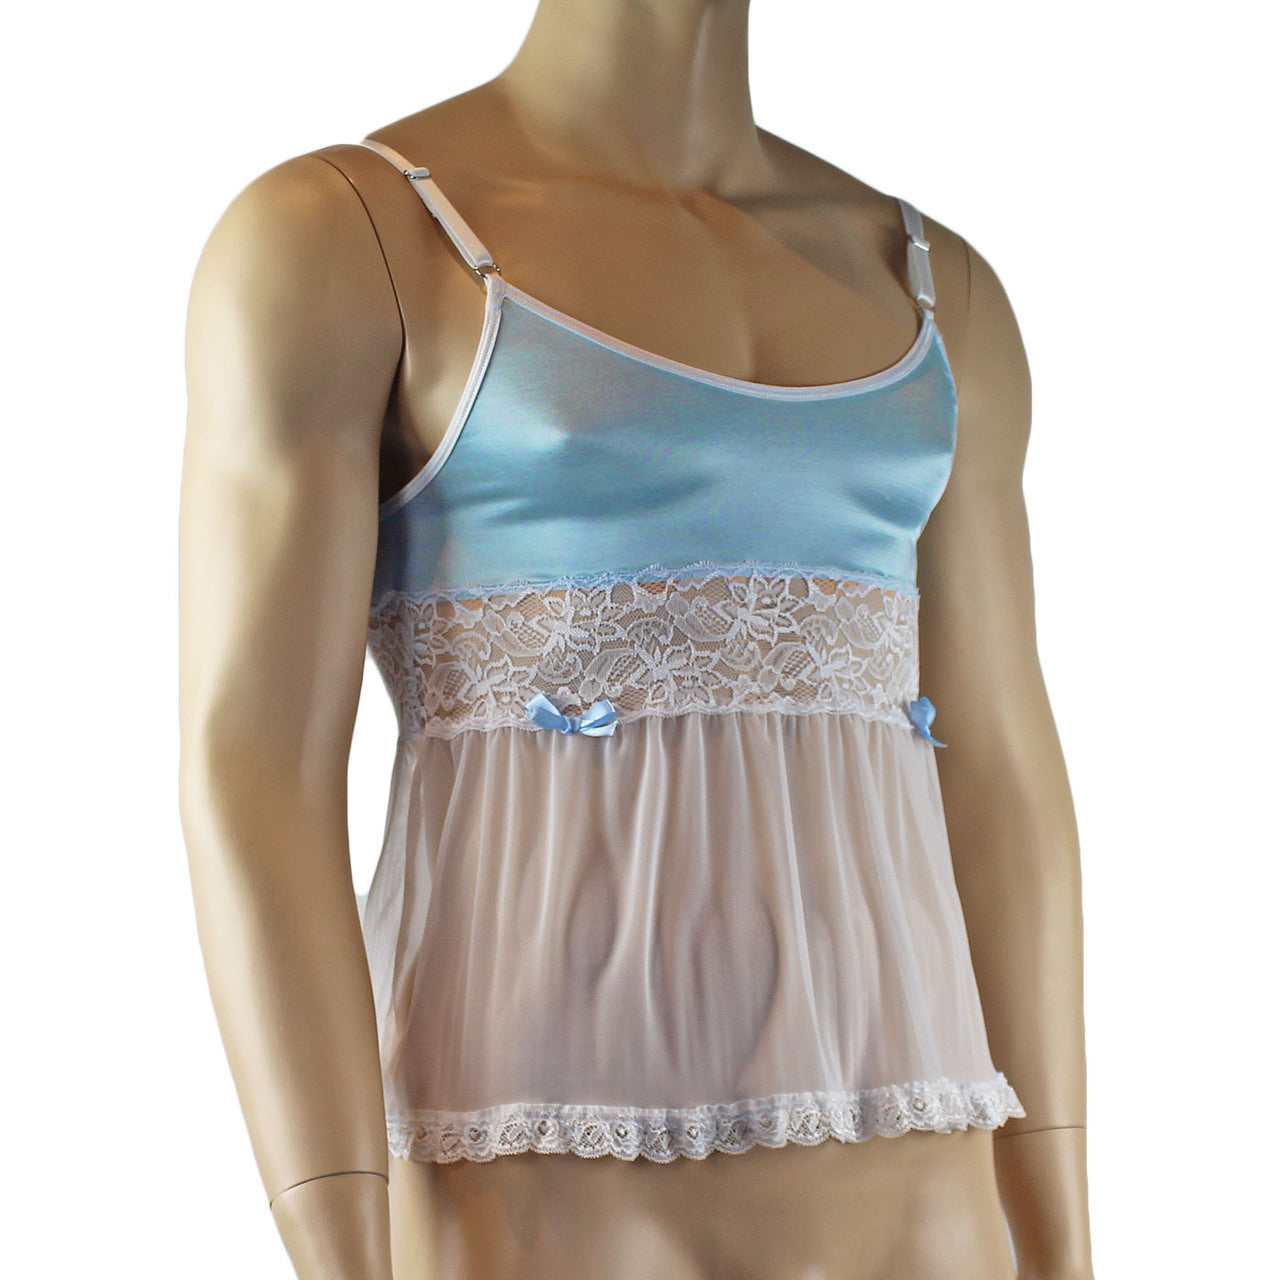 Mens Joanne Mini Babydoll Camisole - Sizes up to 3XL Light Blue & White